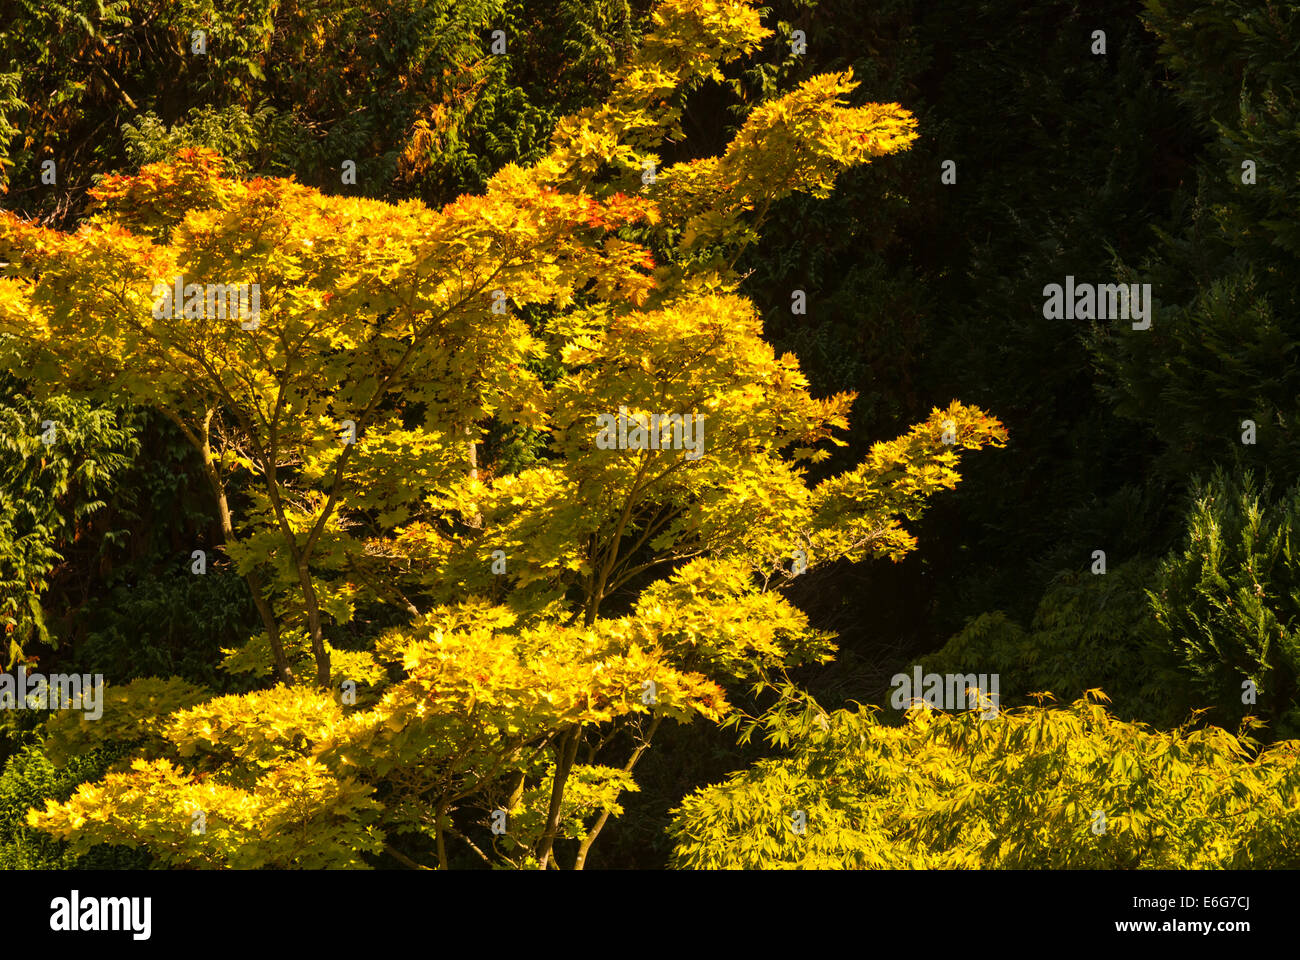 An Acer Tree in sunlight against the dark green of the pines. Stock Photo